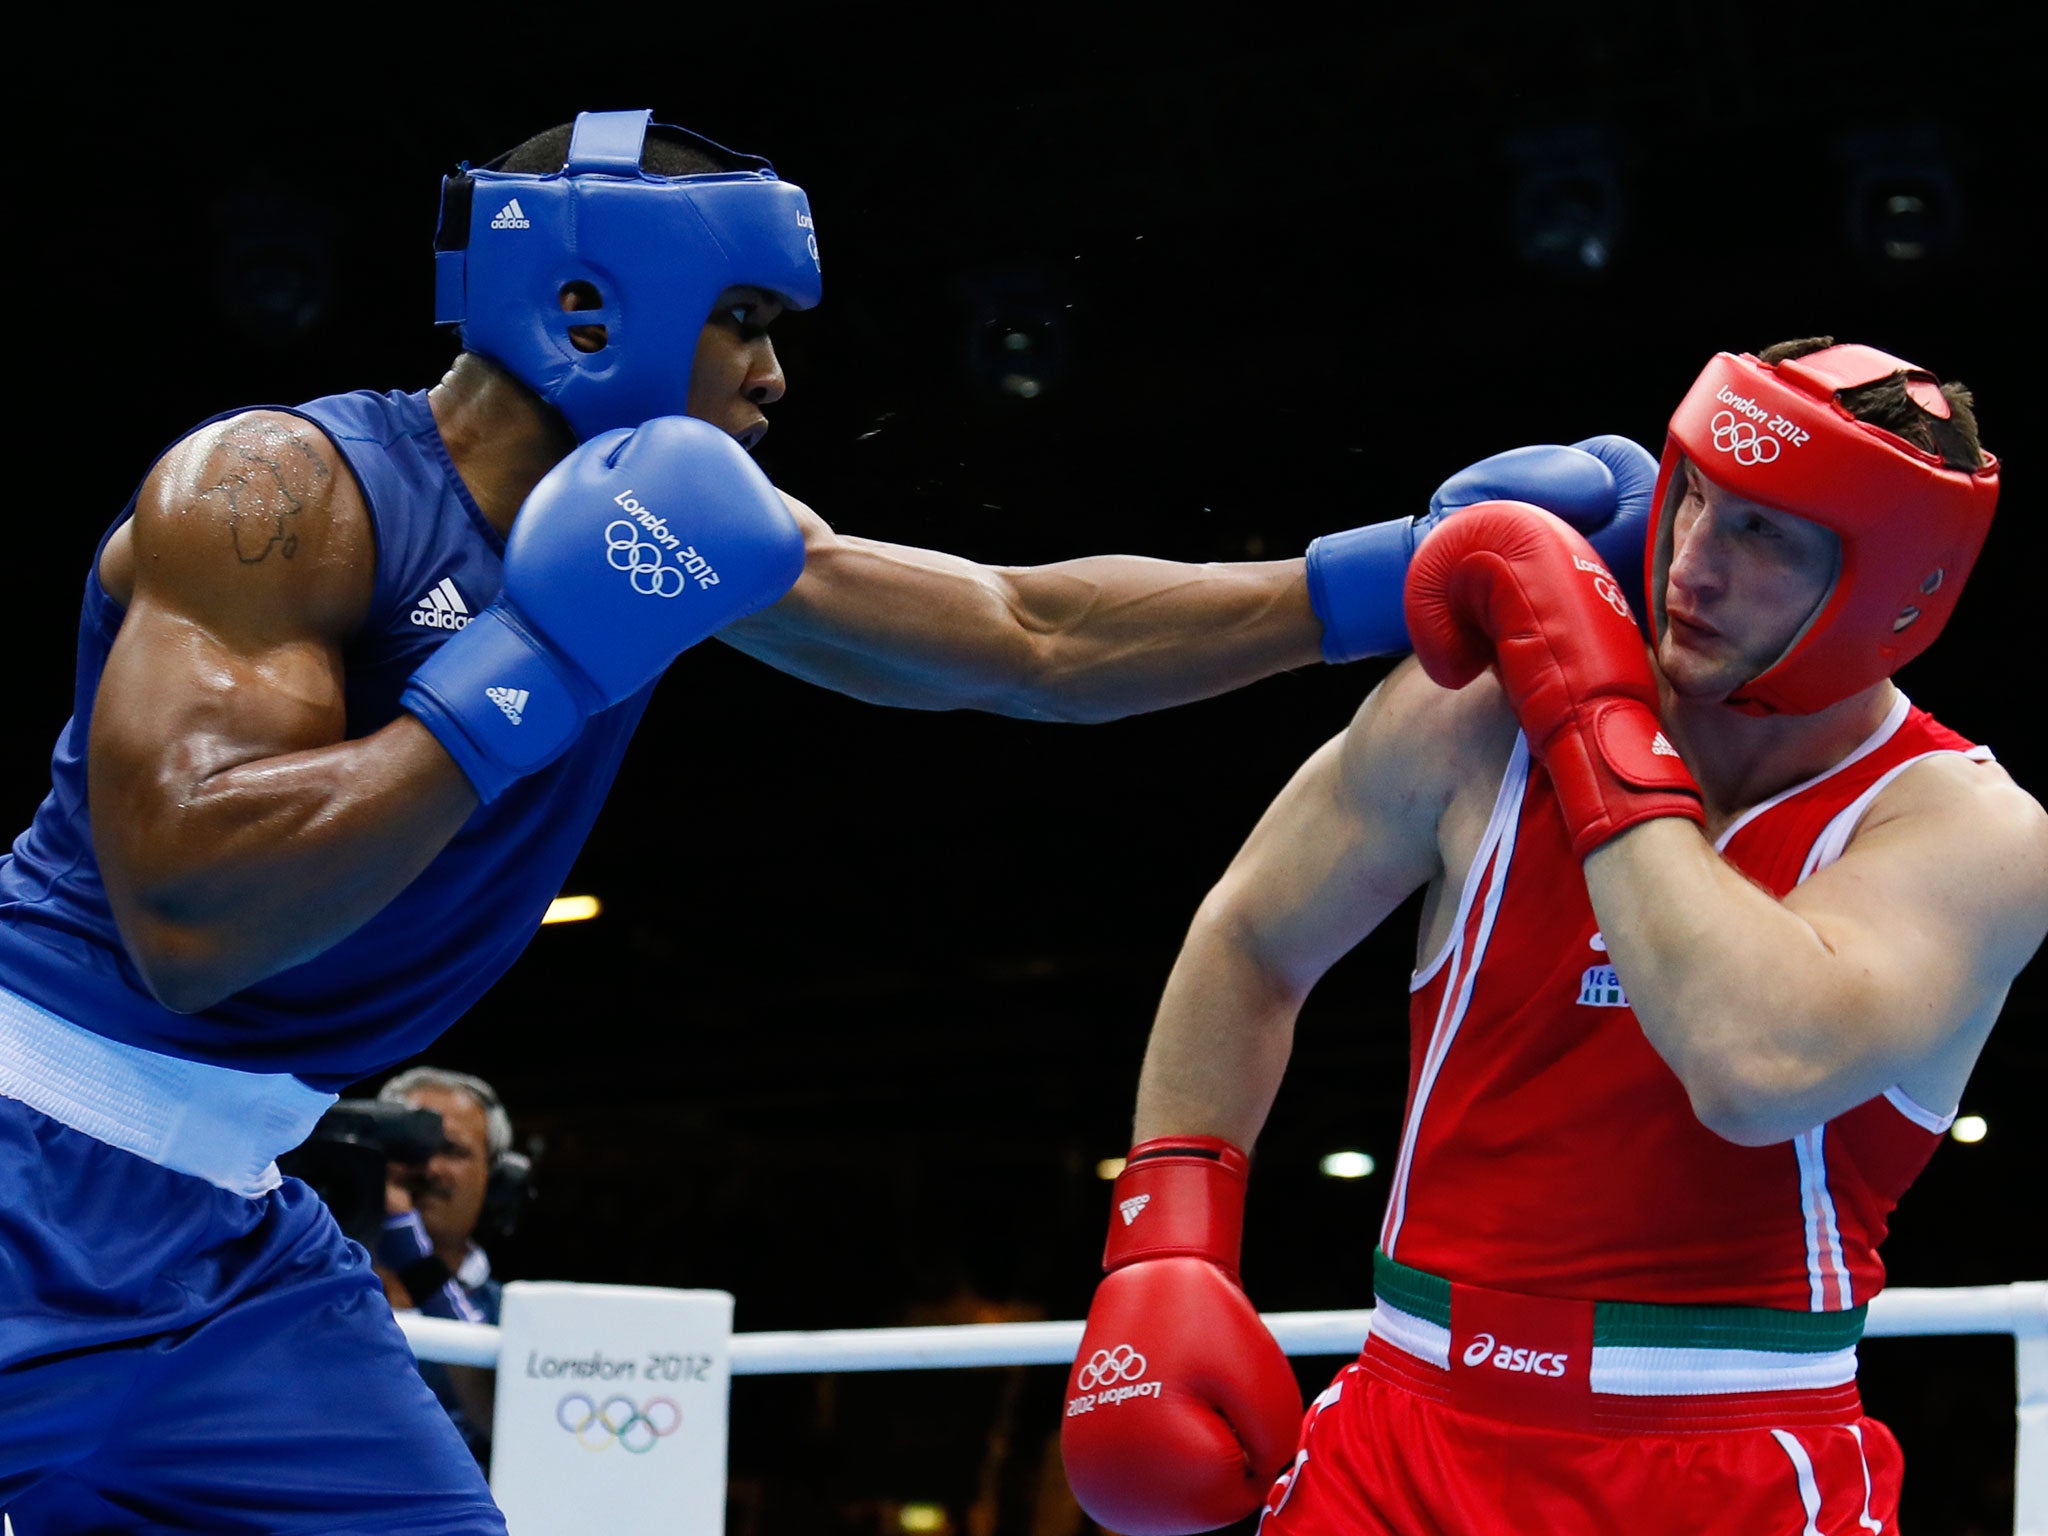 Where it all started: Joshua in action during his 2012 Gold Olympic fight against Roberto Cammarelle